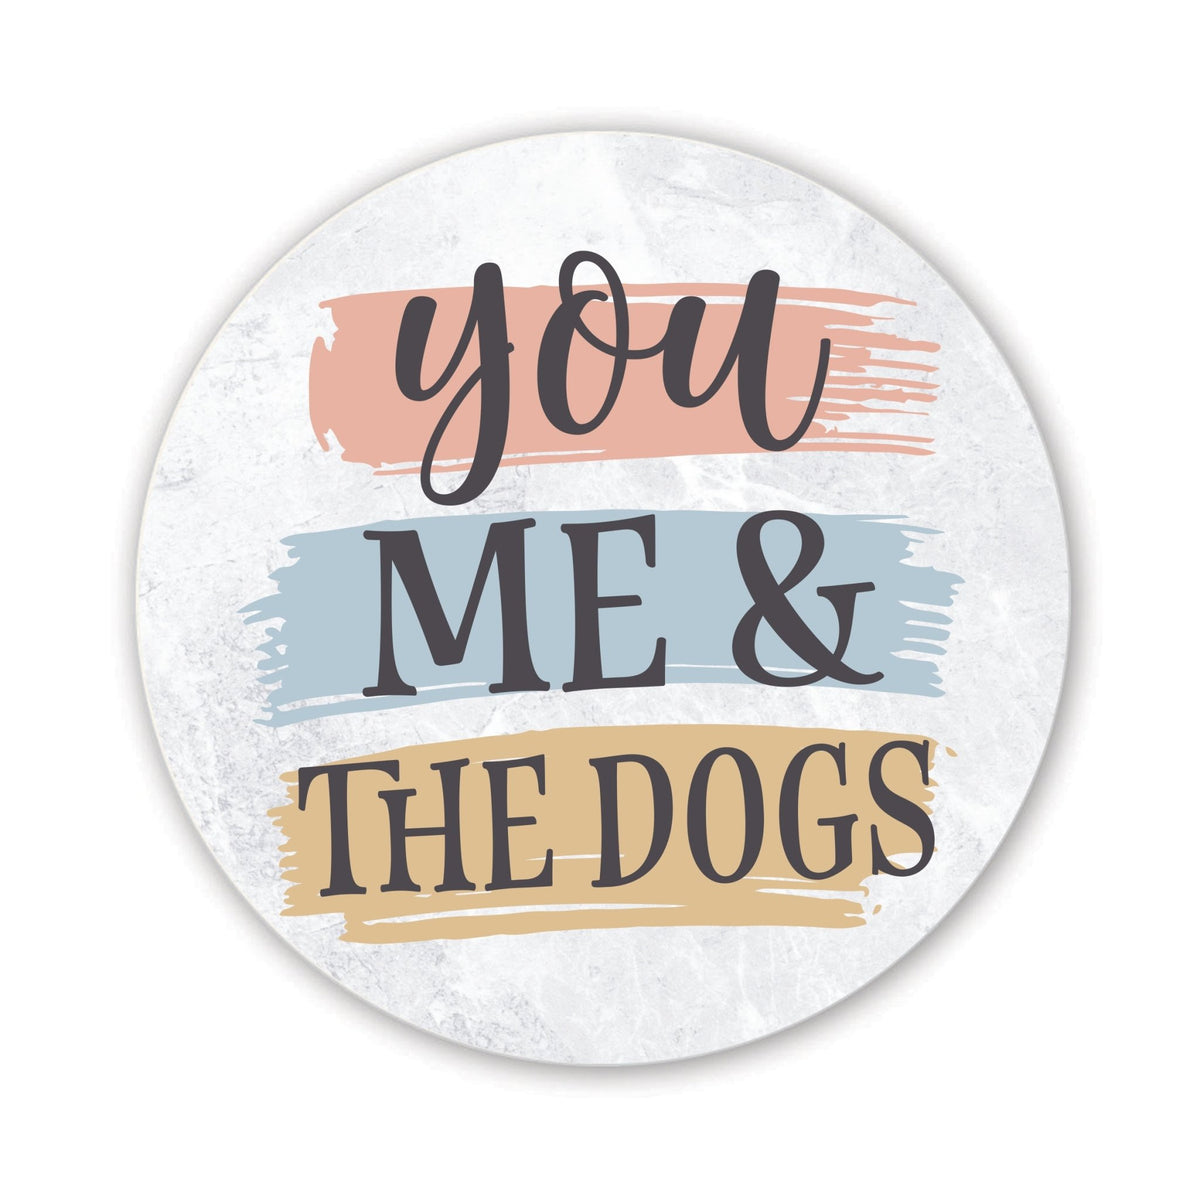 Refrigerator Magnet Perfect Gift Idea For Pet Owners - You Me &amp; The Dogs - LifeSong Milestones